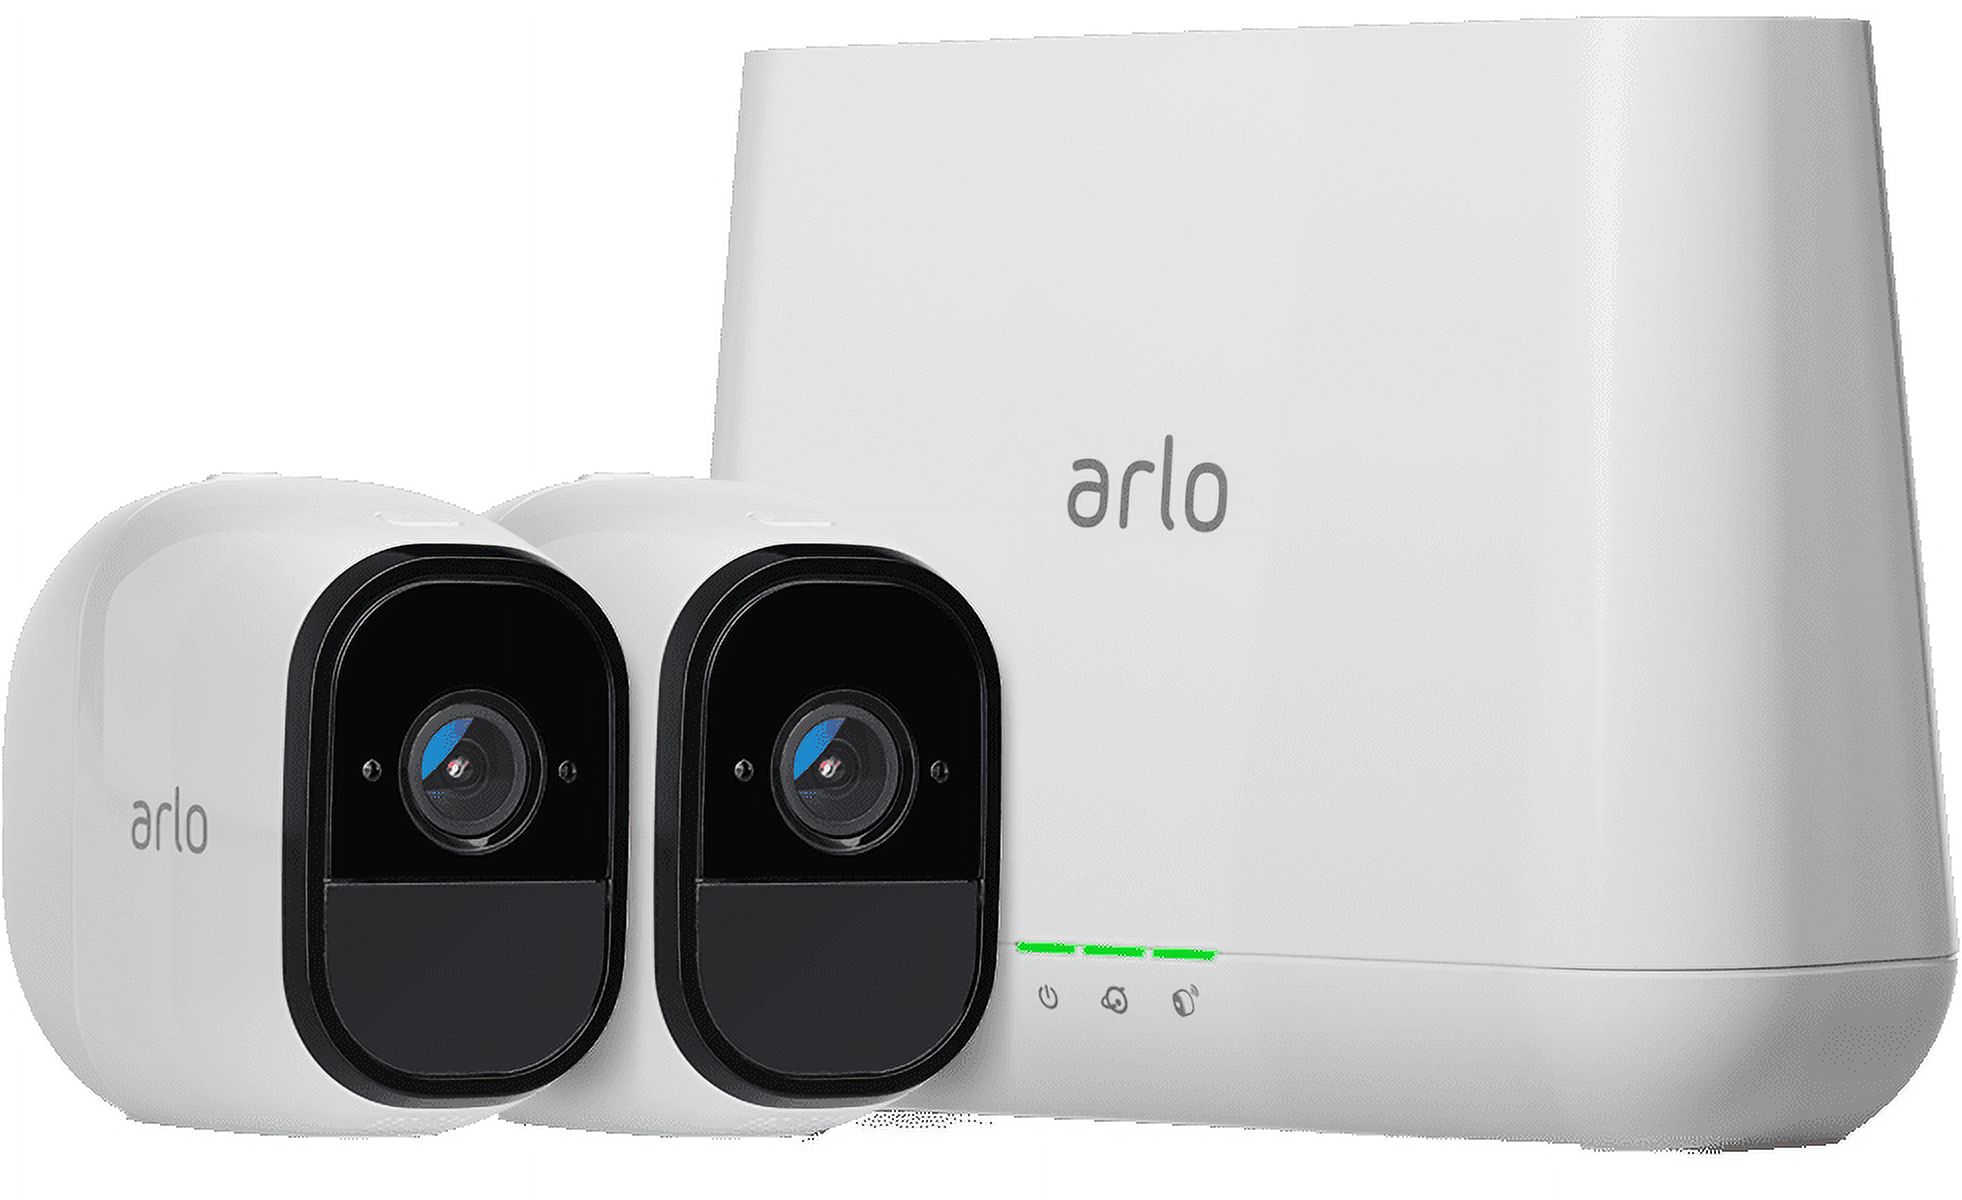 Arlo Pro 720P HD Security Camera System VMS4230 with FREE Outdoor Mount VMA1000 - 2 Wire-Free Rechargeable Battery Cameras with Two-Way Audio, Indoor/Outdoor, Night Vision, Motion Detection - image 4 of 16